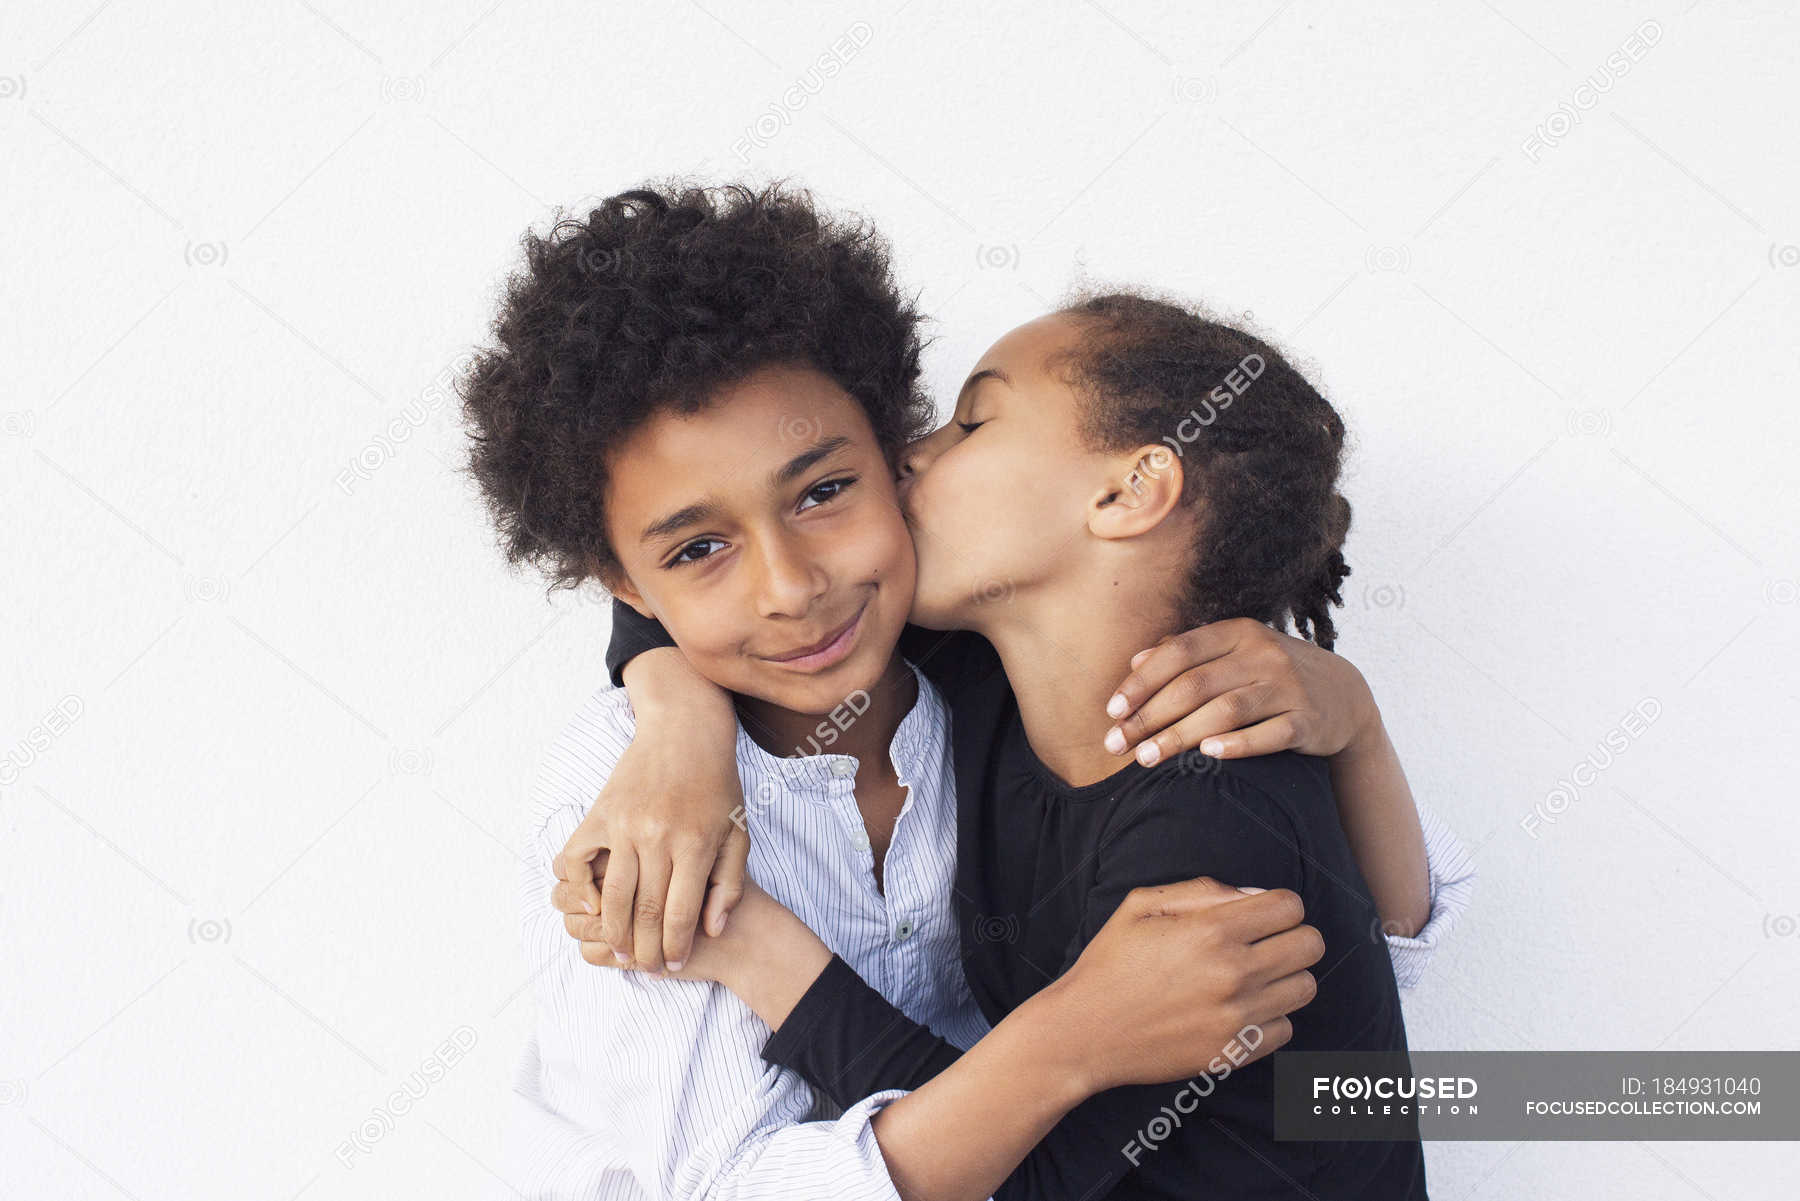 Portrait of Brother and sister embracing against white background — people,  side by side - Stock Photo | #184931040